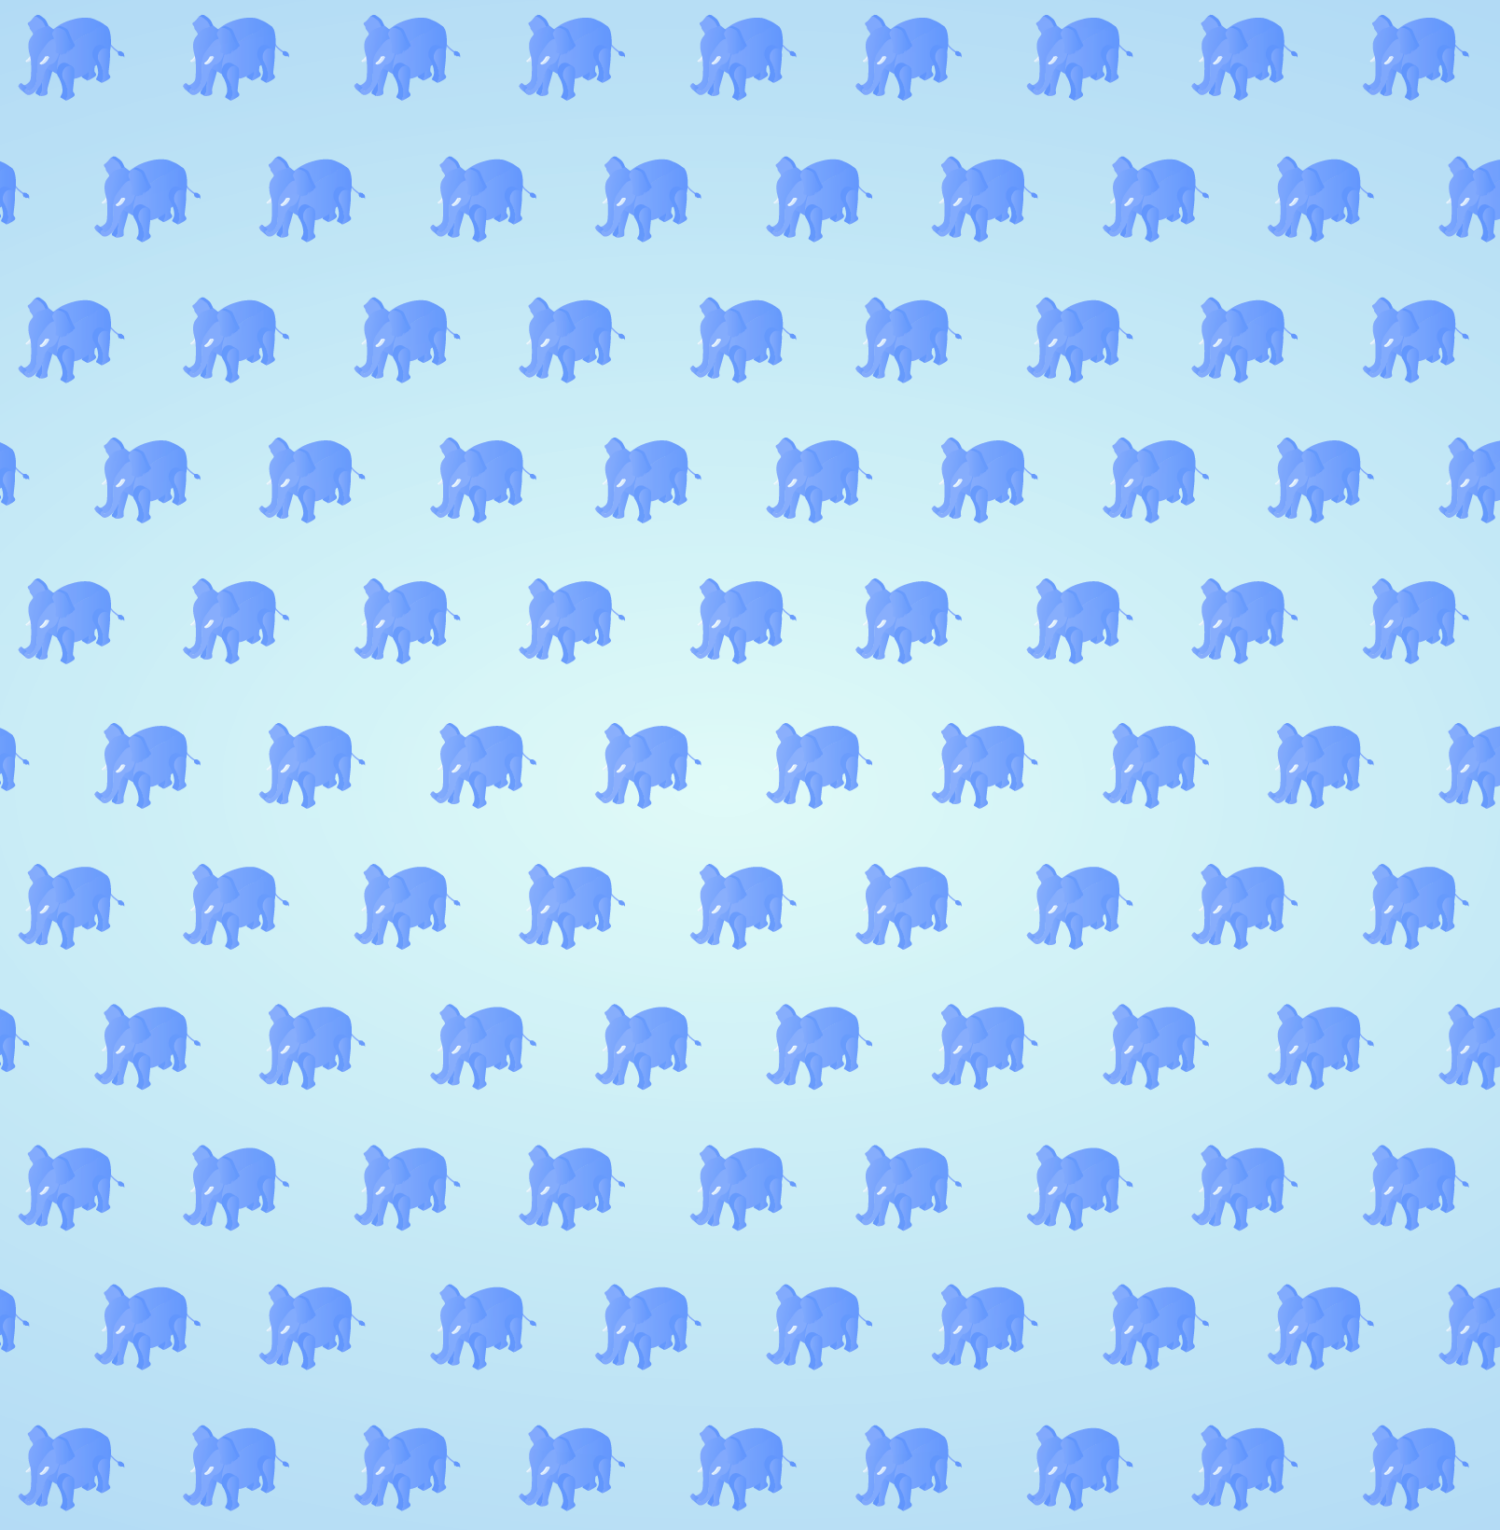 11 Trillion Elephants and Other Answers on CO₂ Storage